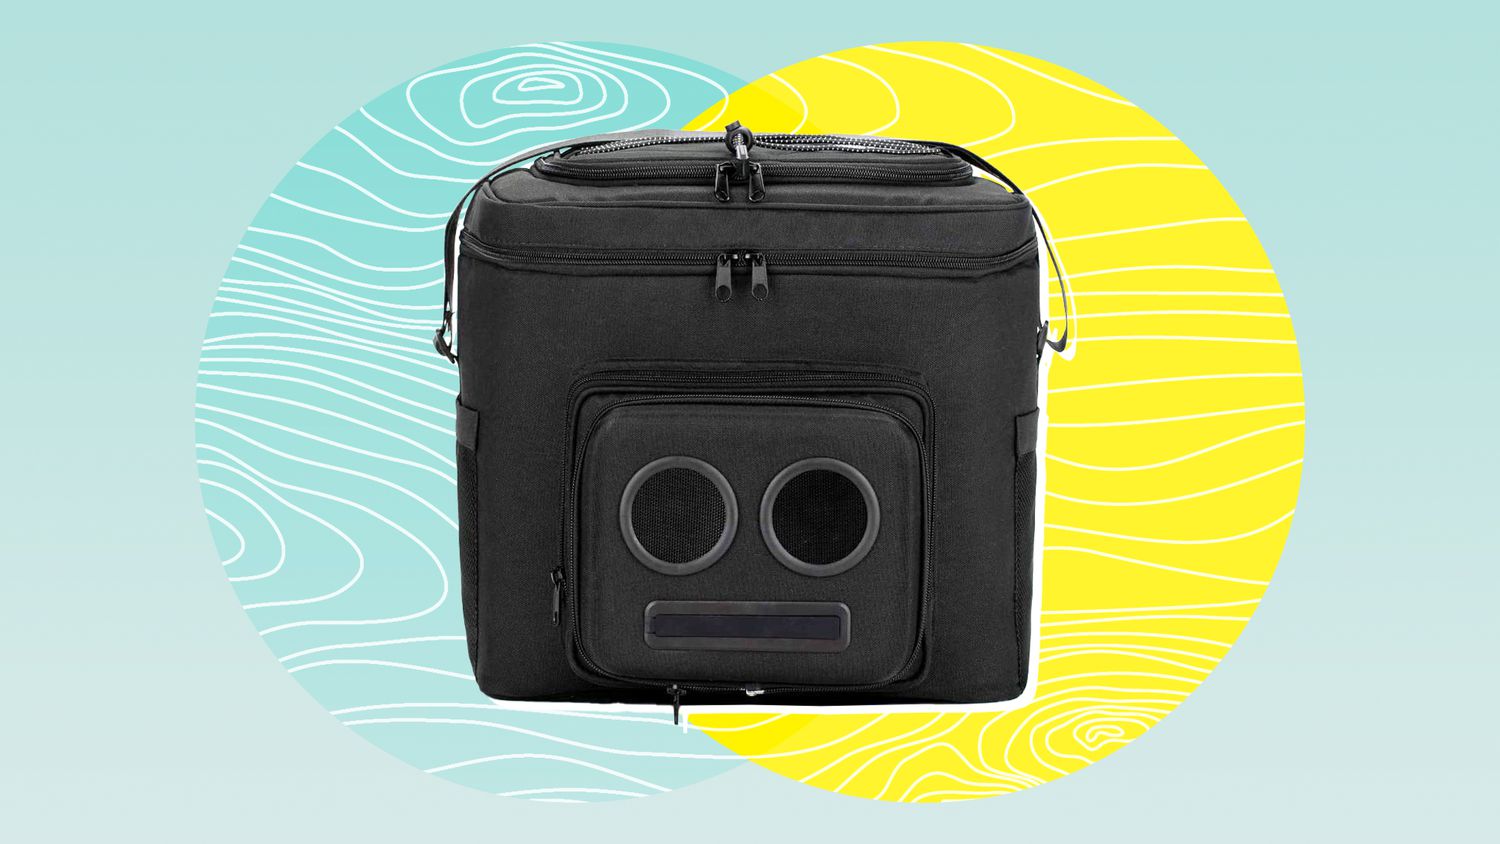 The #1 Cooler with Speakers on Amazon. 20-Watt Bluetooth Speakers & Subwoofer for Parties/Festivals/Boat/Beach. Rechargeable, Works with iPhone & Android (Black, 2020 Edition)